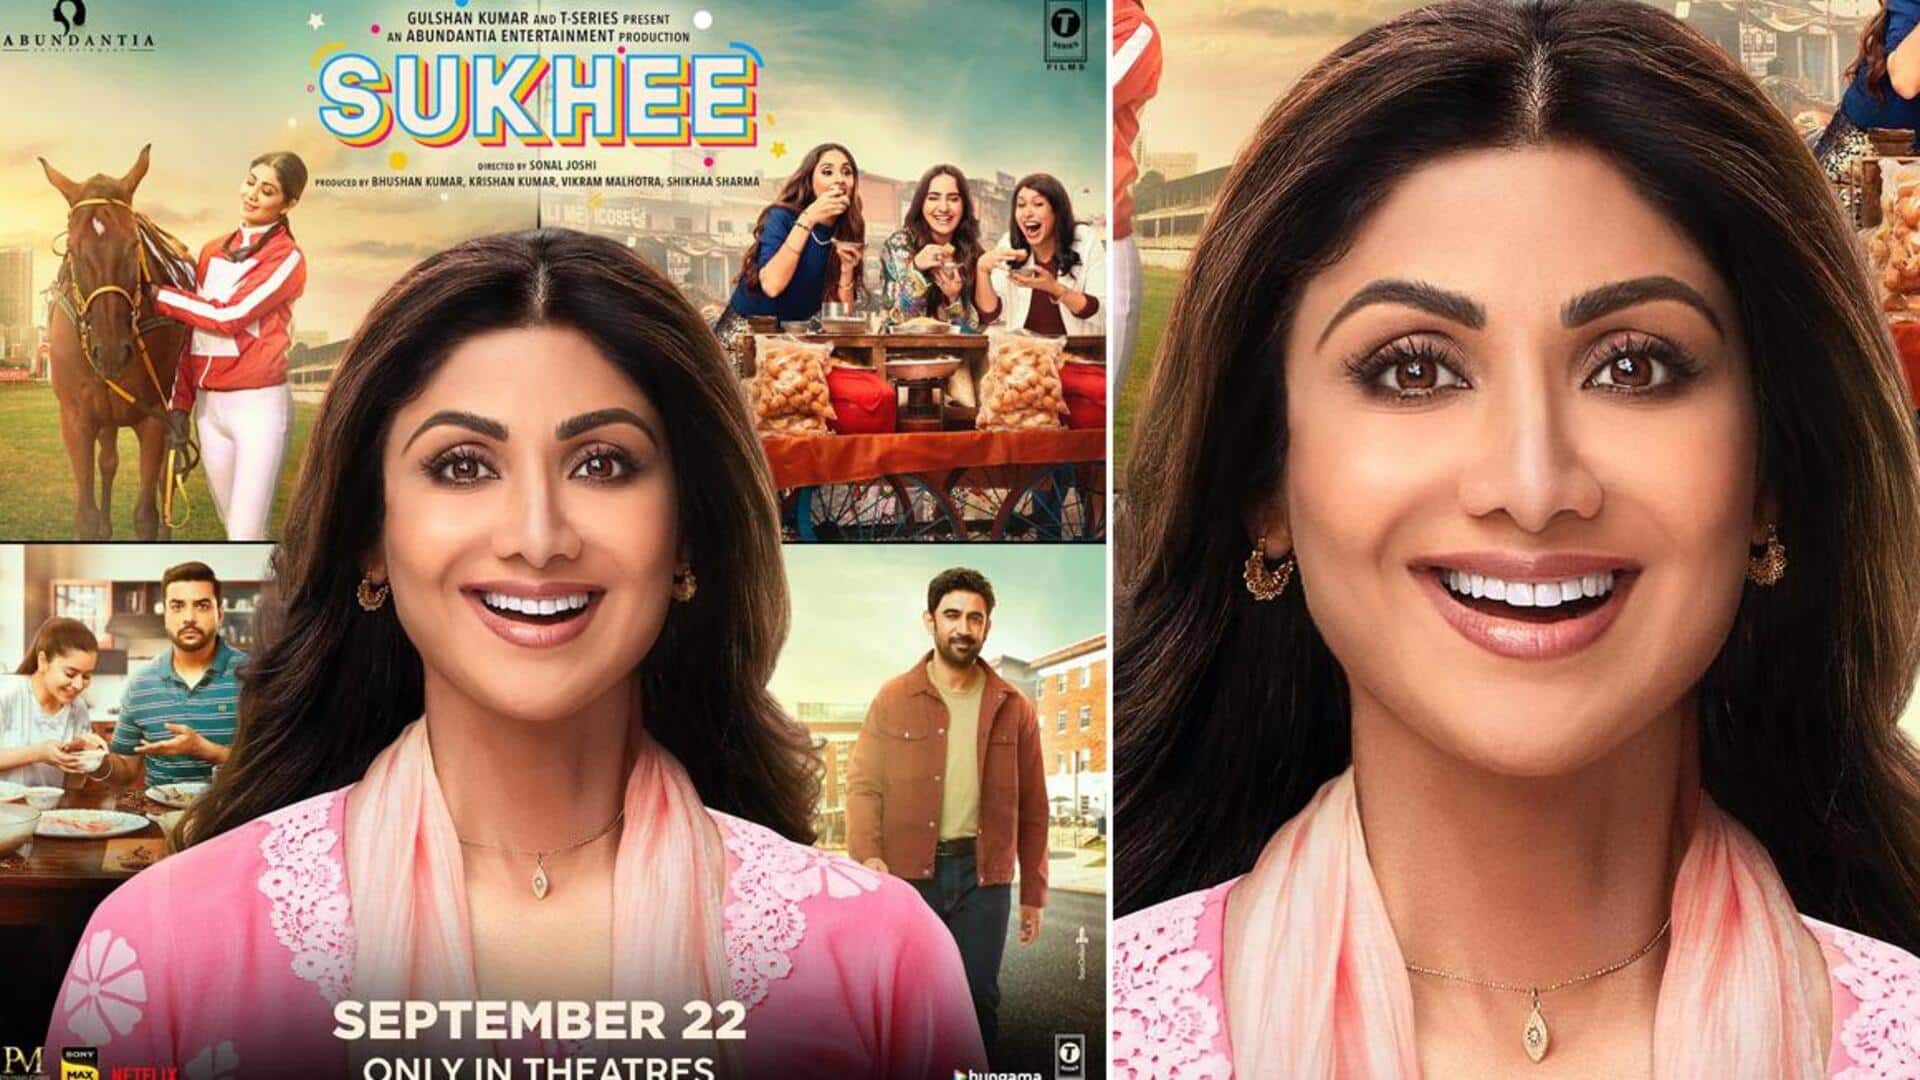 'Sukhee' box office collection: Slow start for Shilpa's film